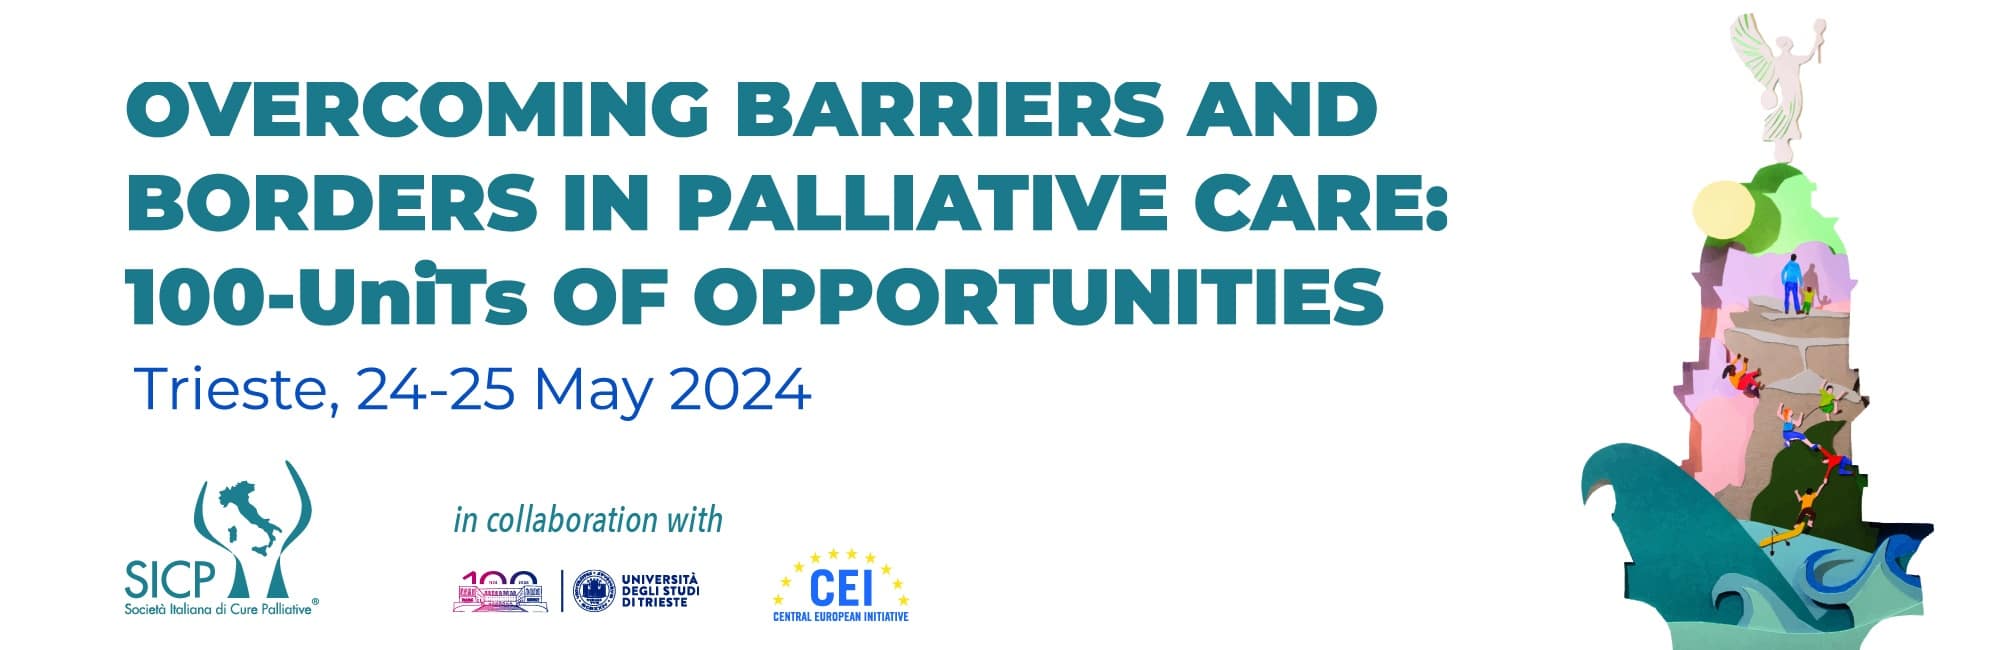 Overcoming Barriers and Borders in Palliativecare: 100-UniTs of Opportunities